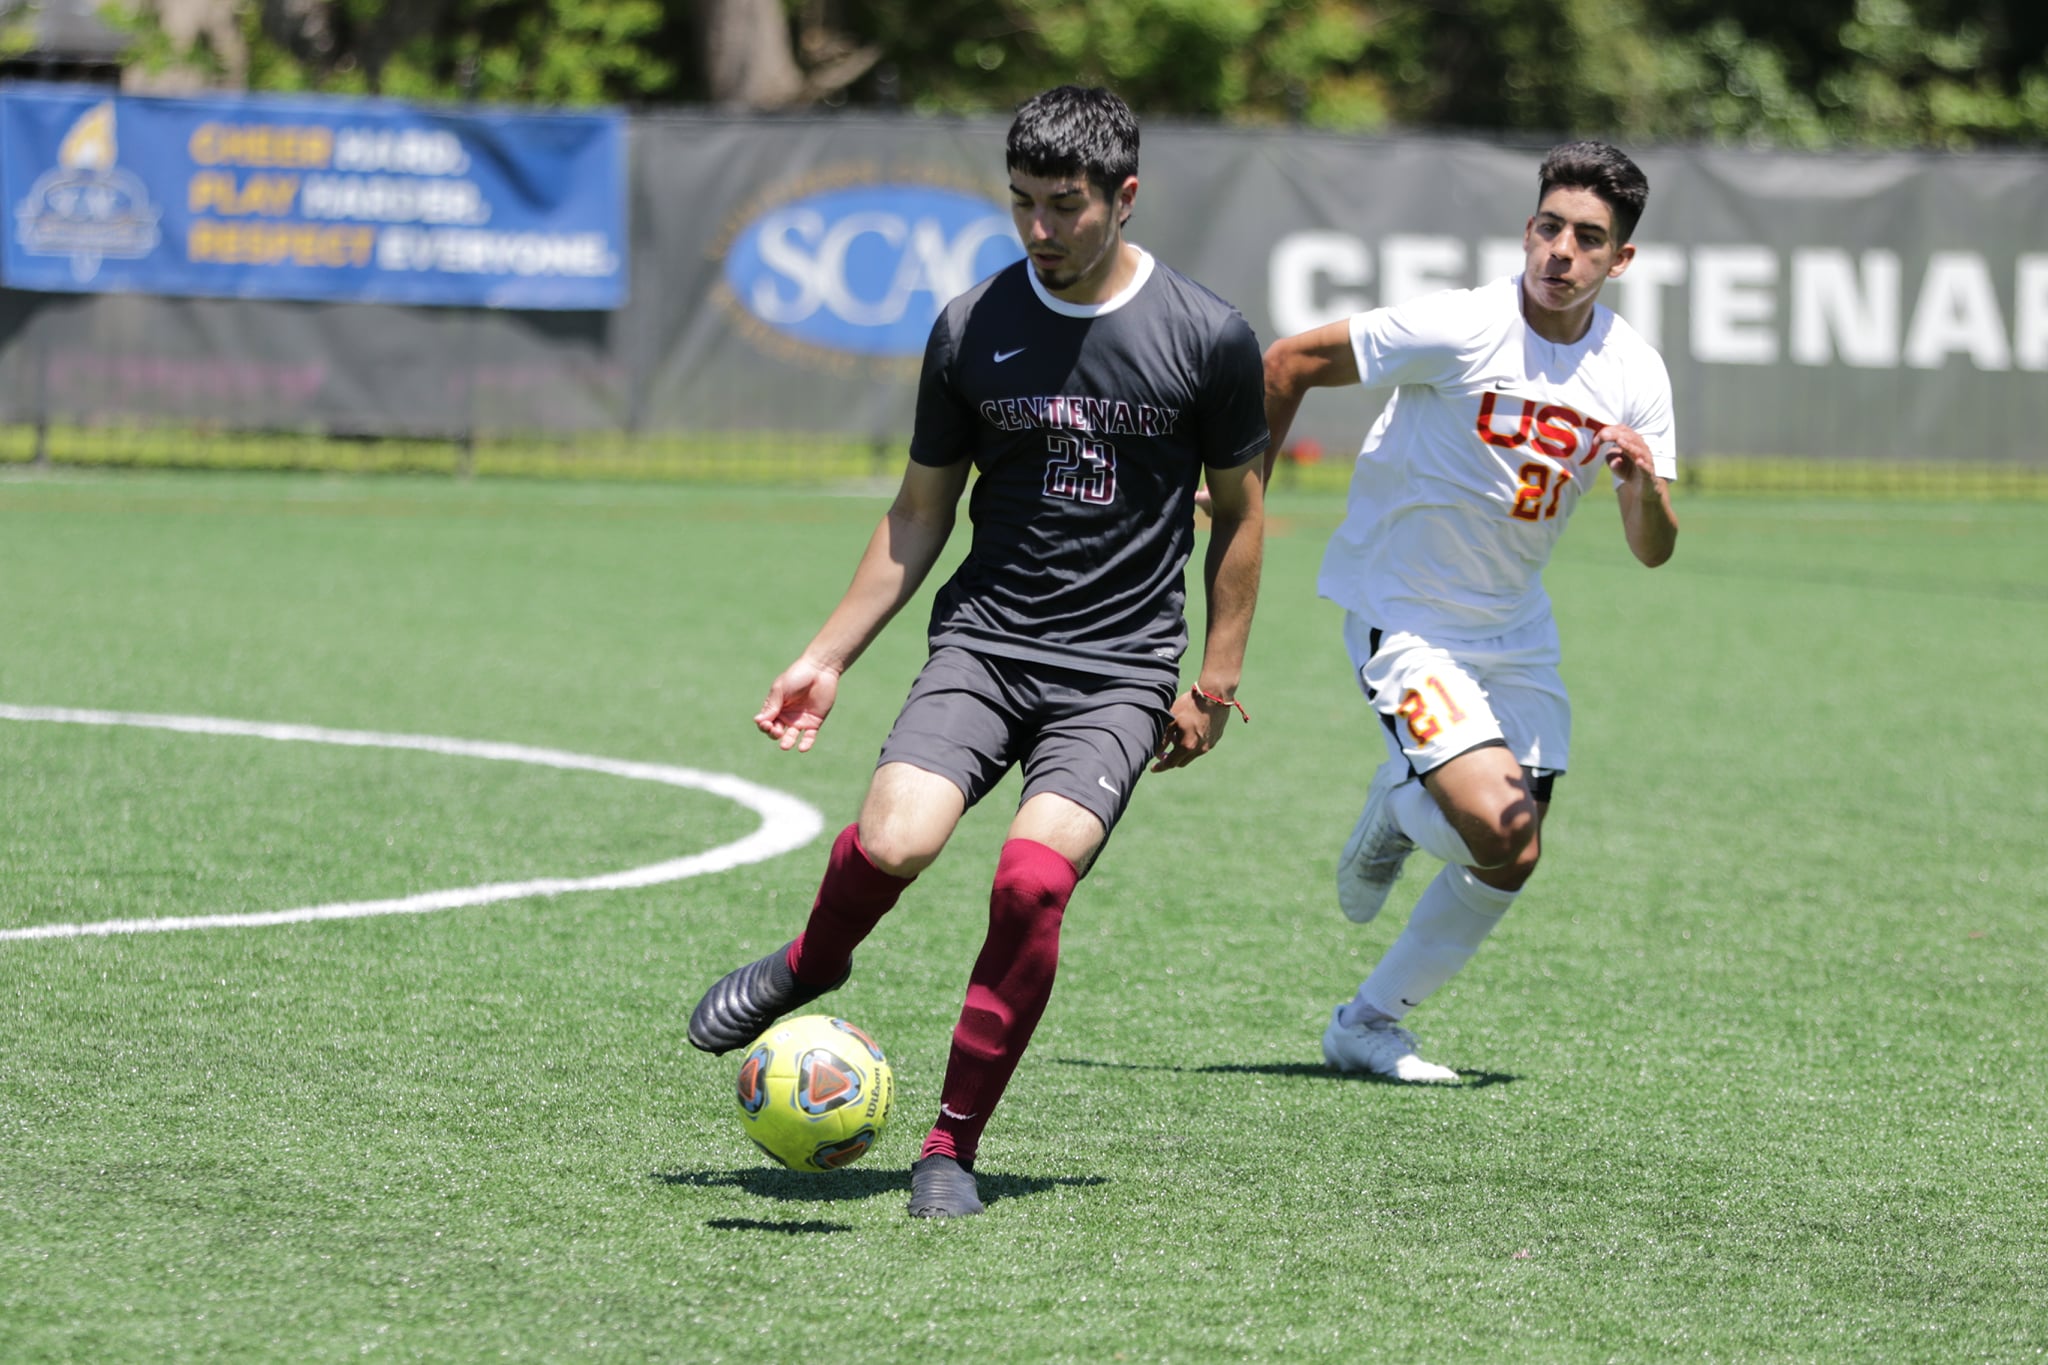 Gents Remain Dominant at Home, Edge Huntingdon College 2-1 on Sunday